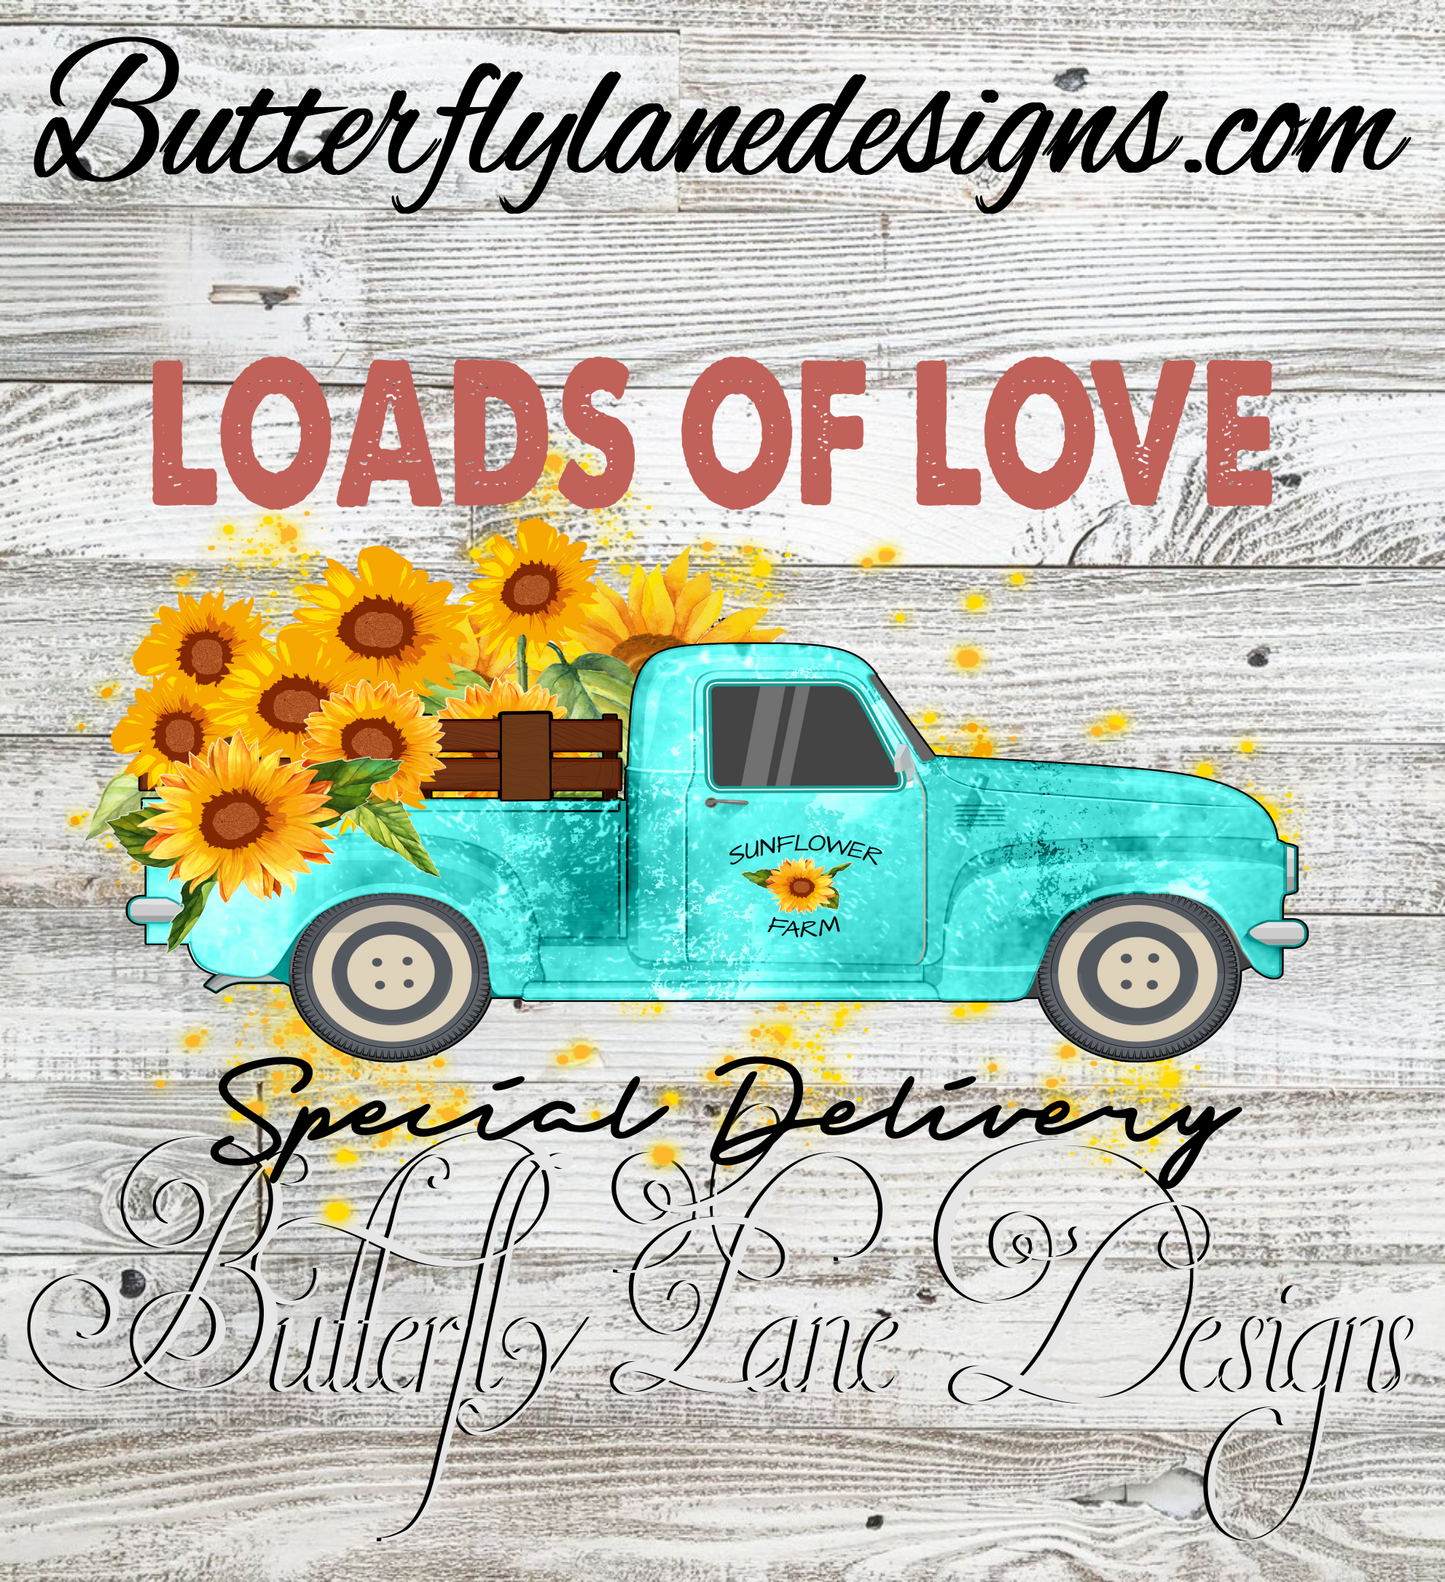 Loads of love, blue truck sunflowers special delivery :: Clear Decal or VCD